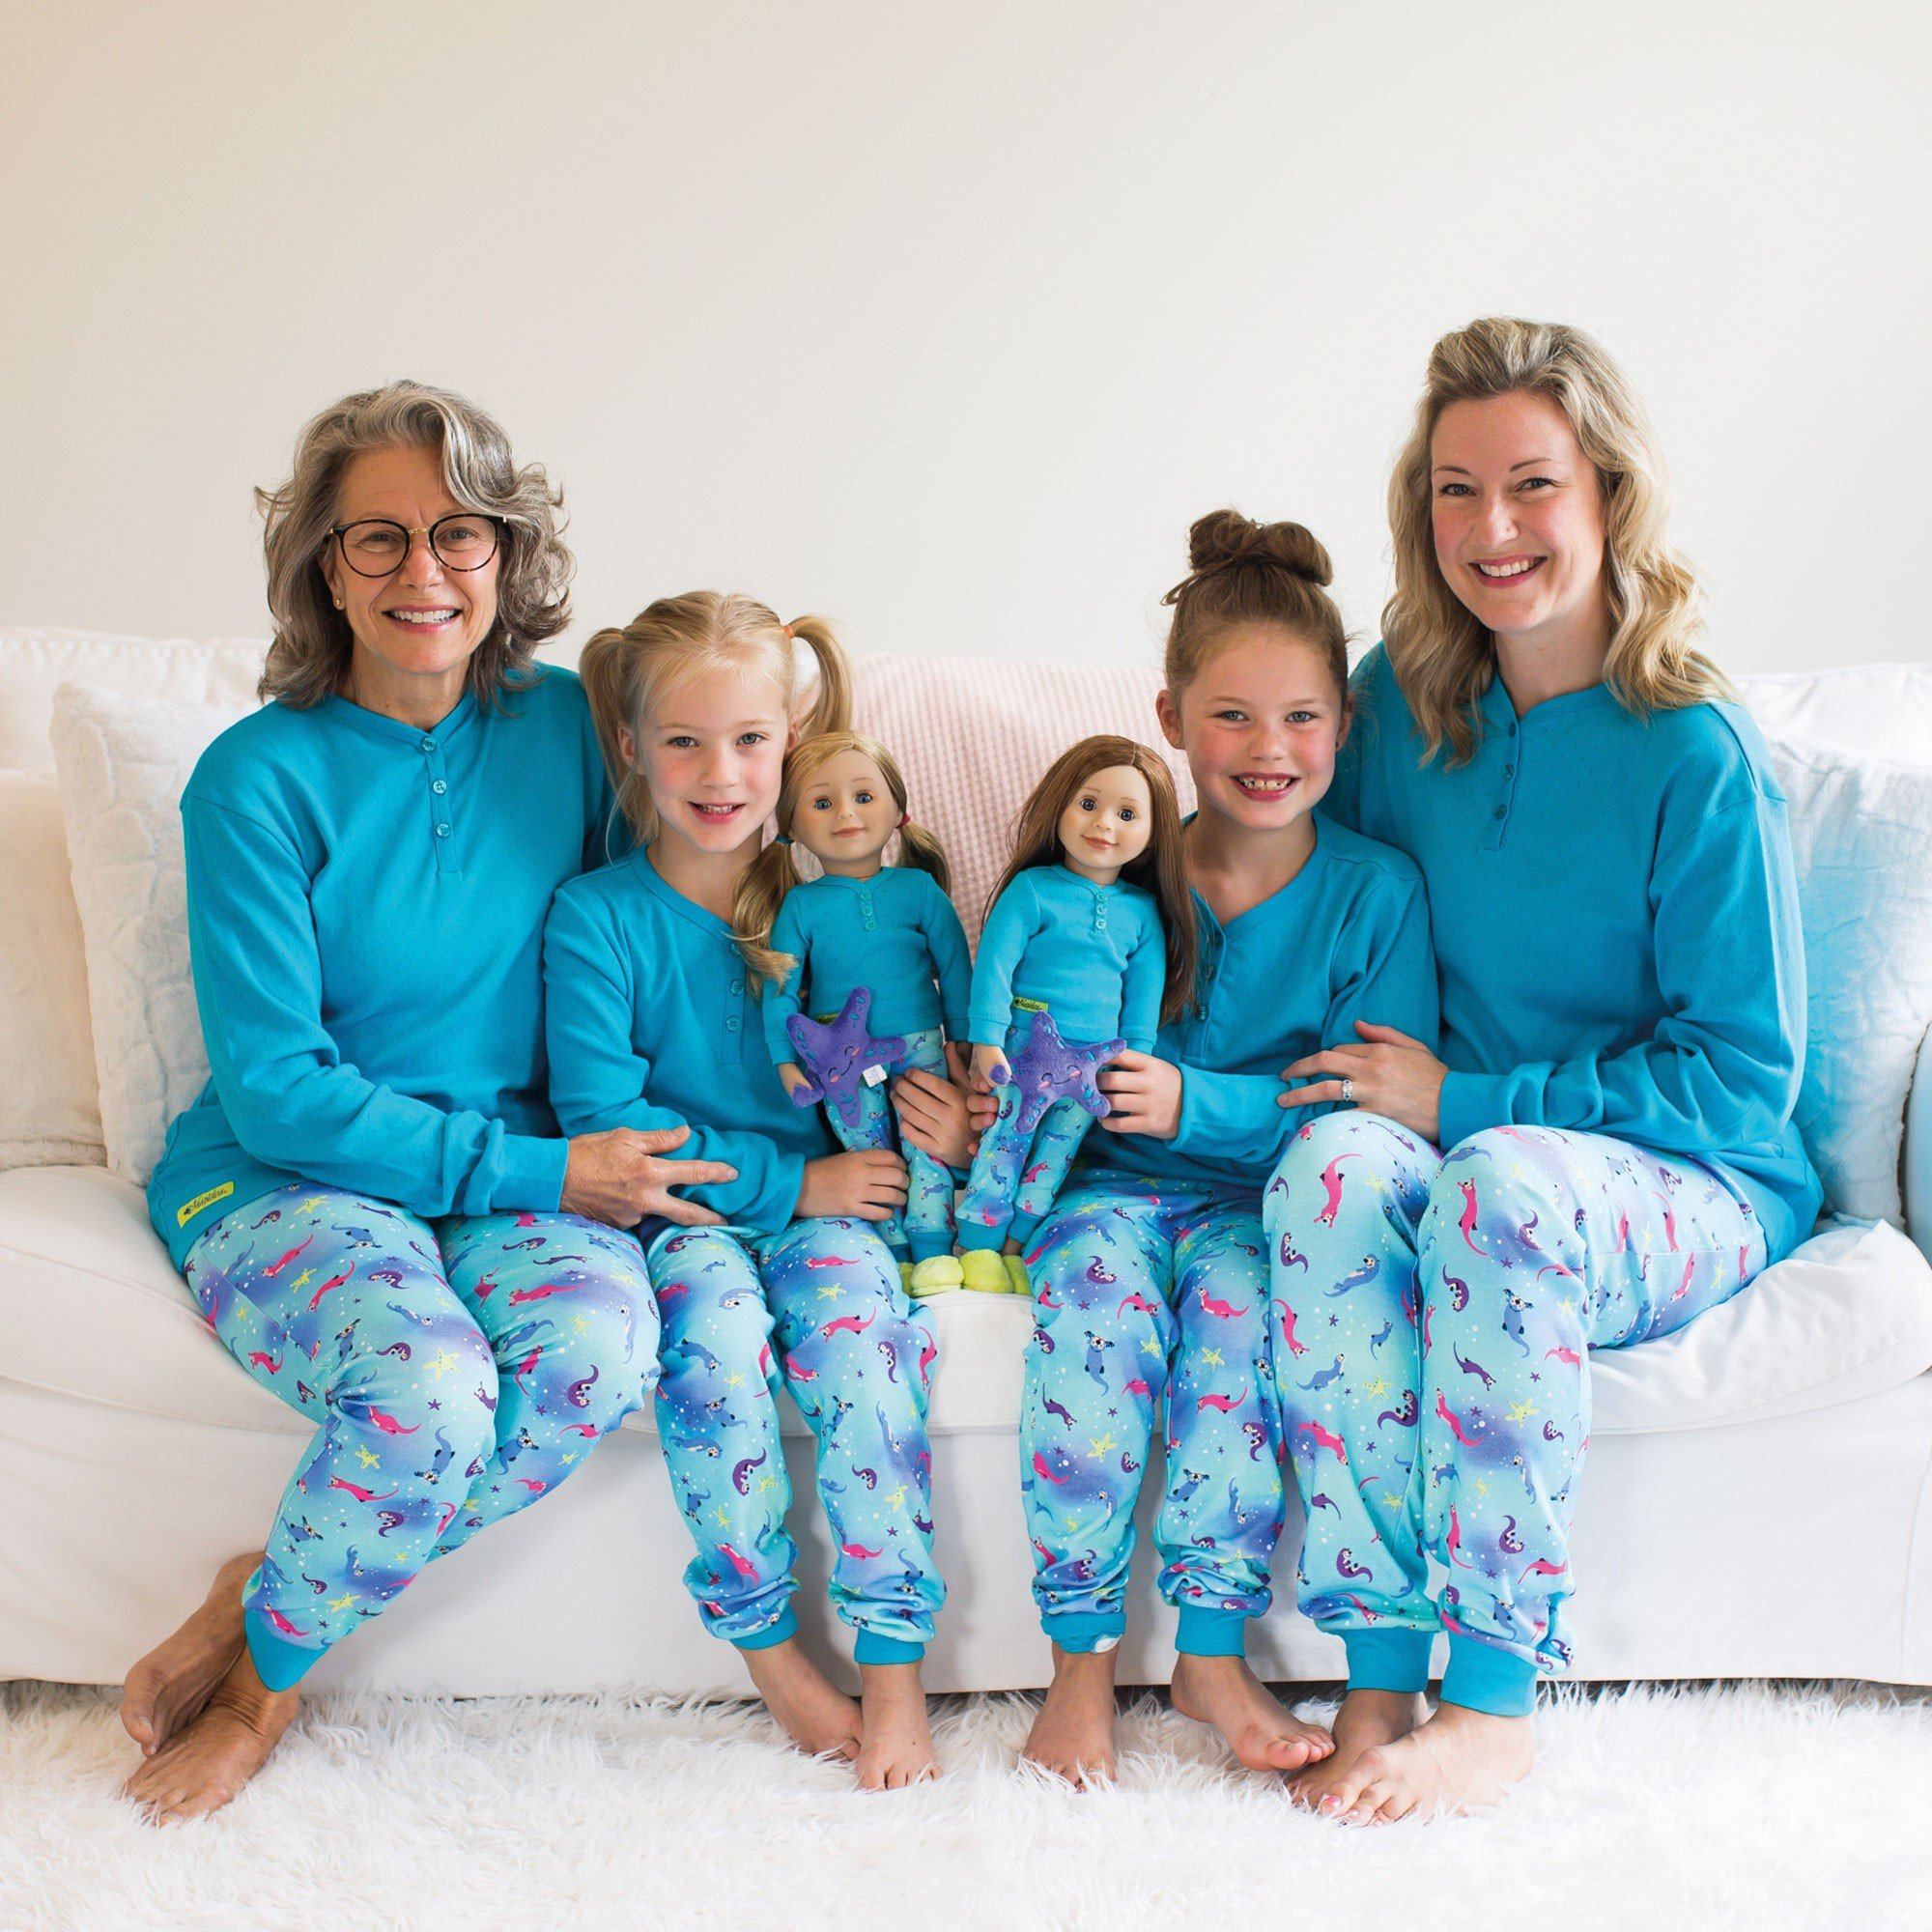 Sea Otter Sleepwear for Girl and Families